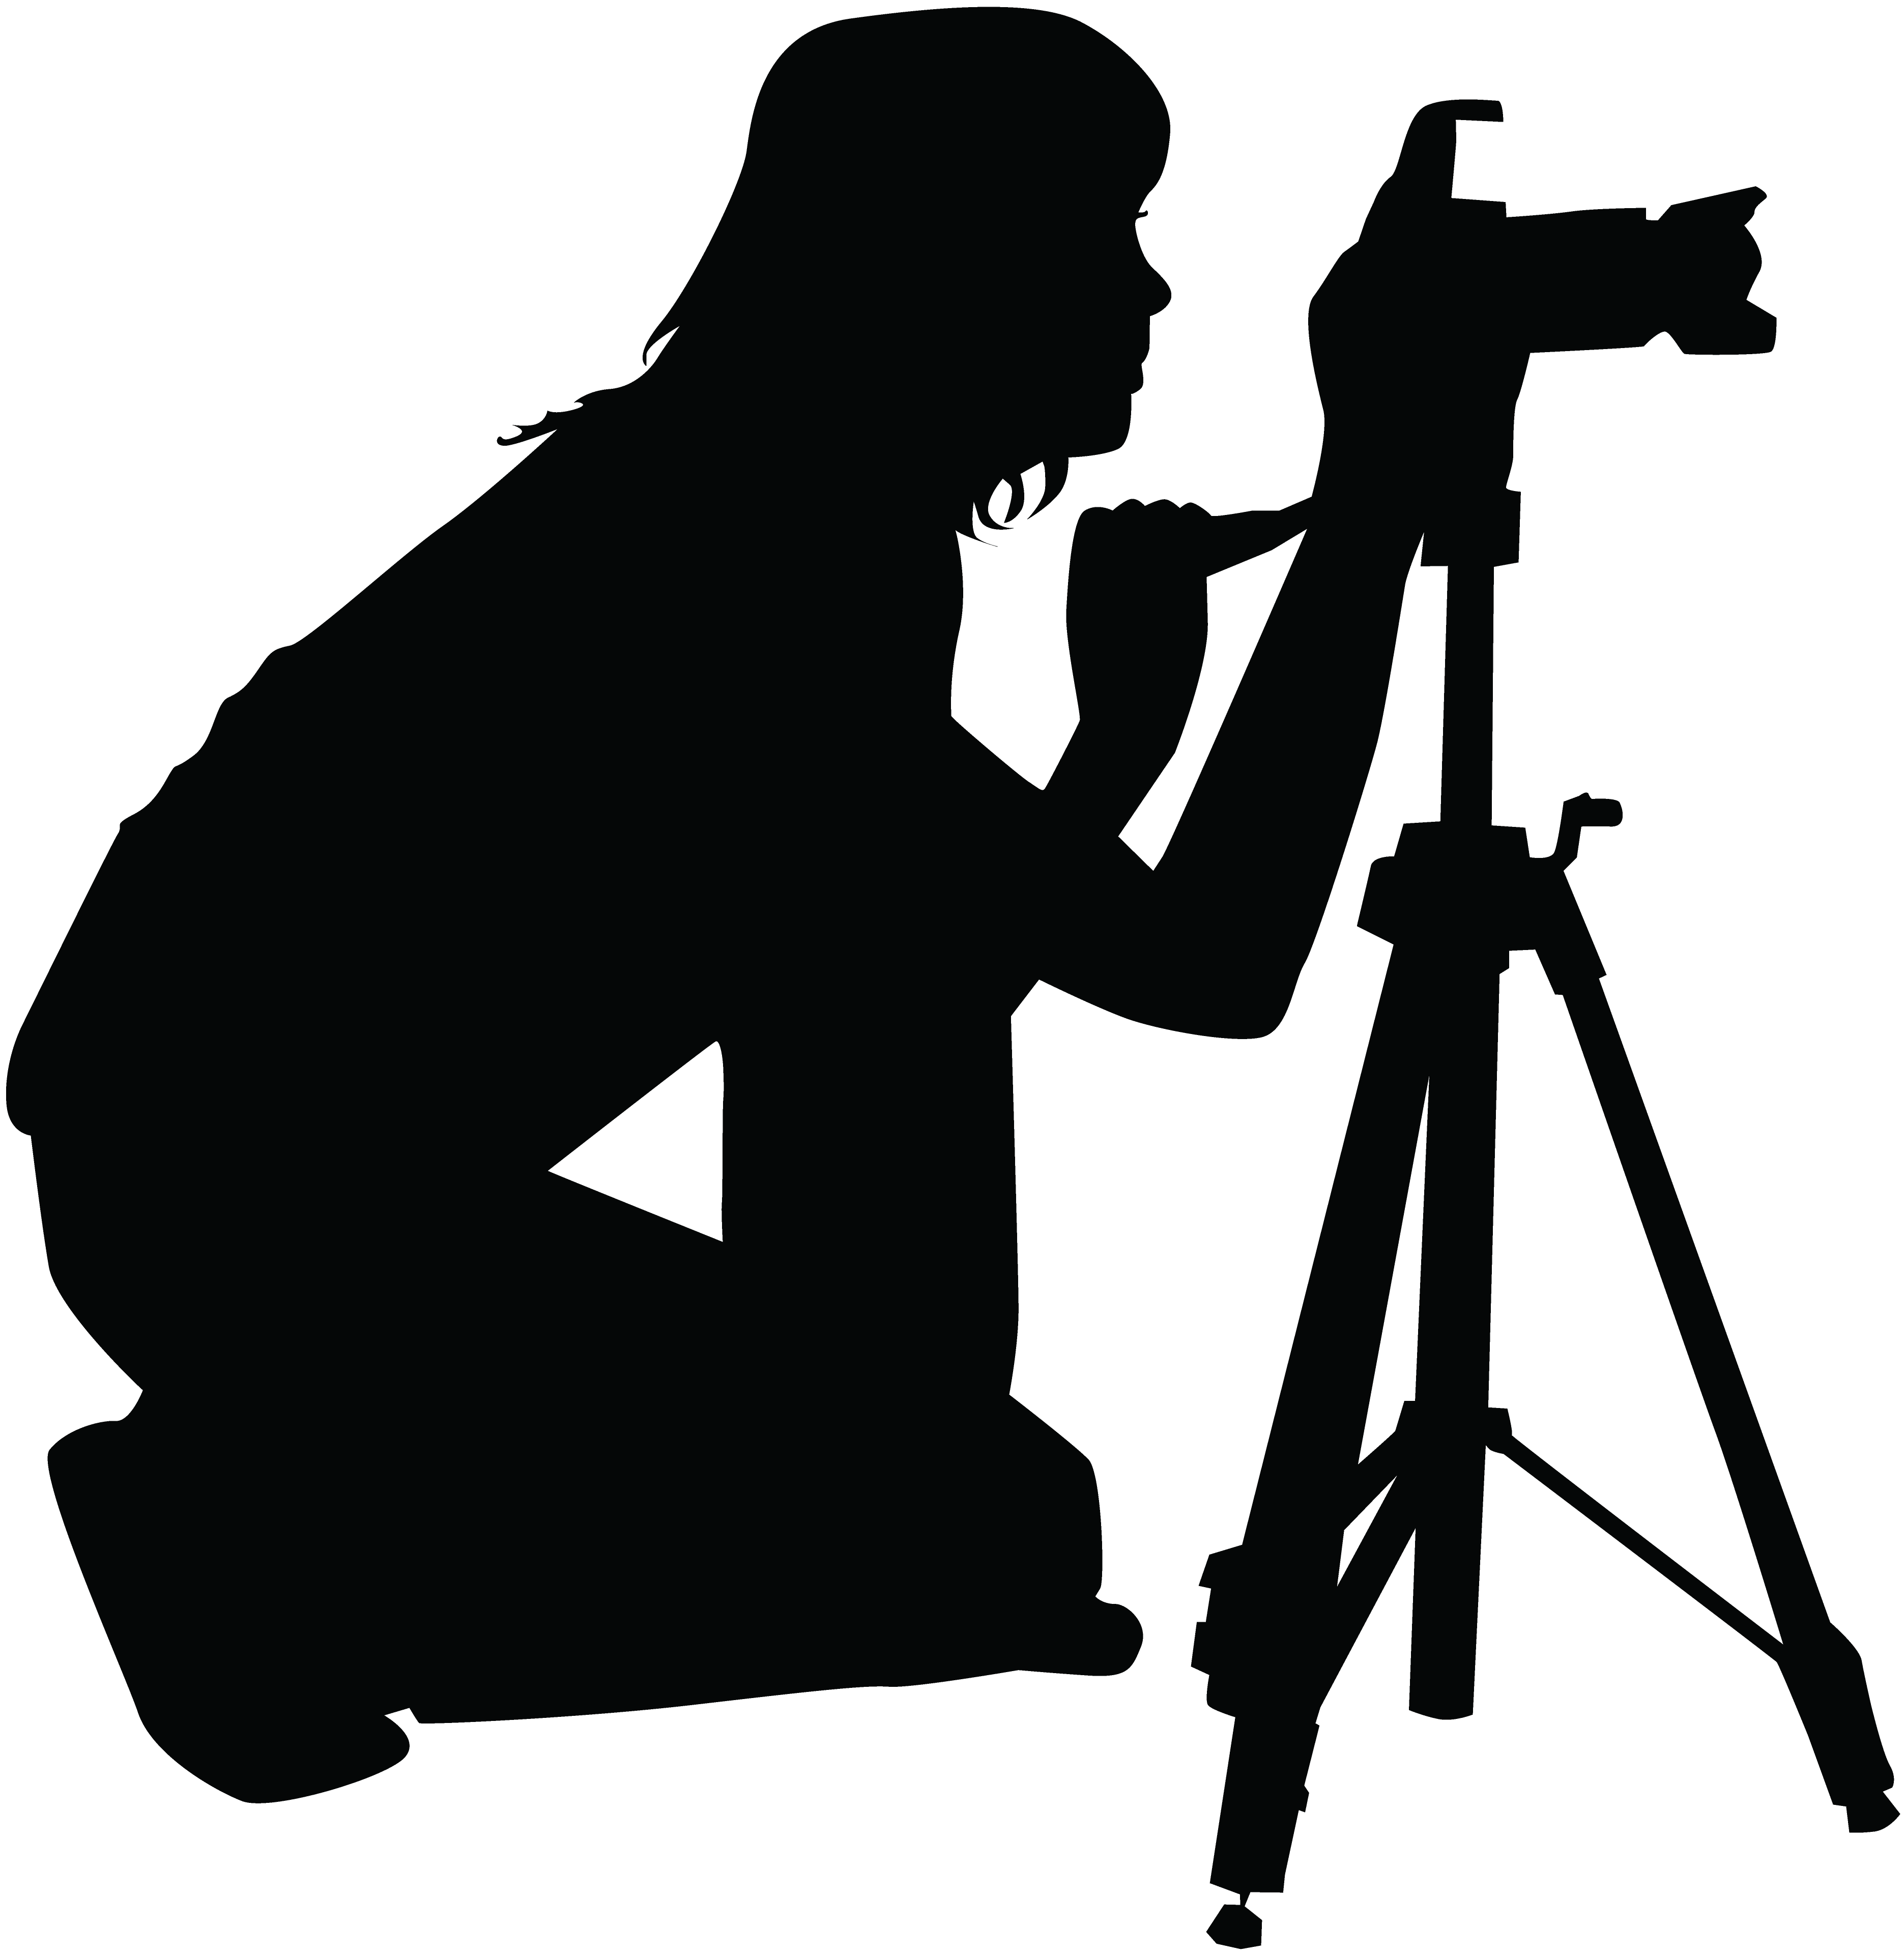 Camera Operator Photography Silhouette Png Download 37423840